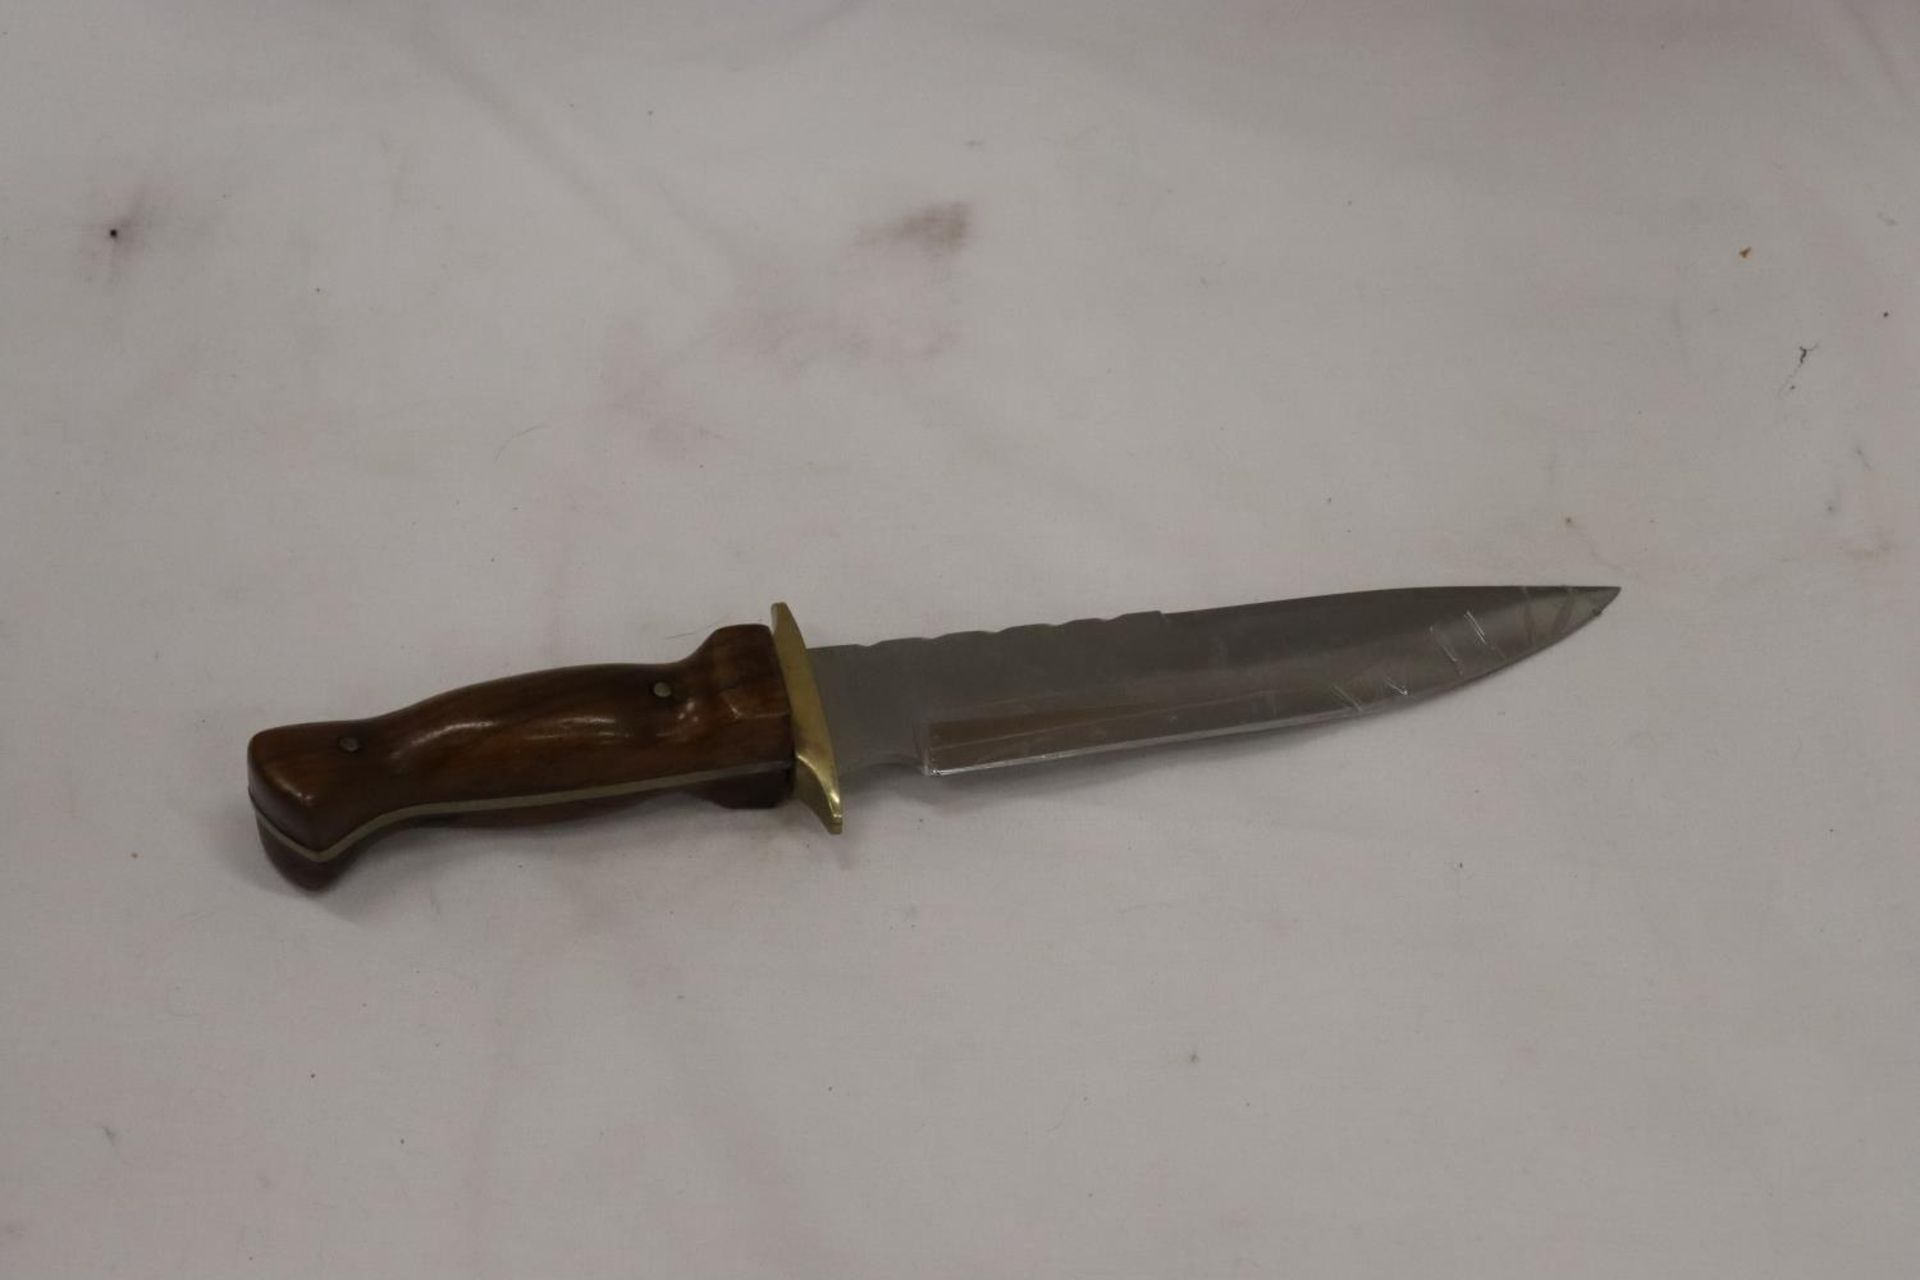 A HANDMADE DAGGER WITH WOODEN HANDLE